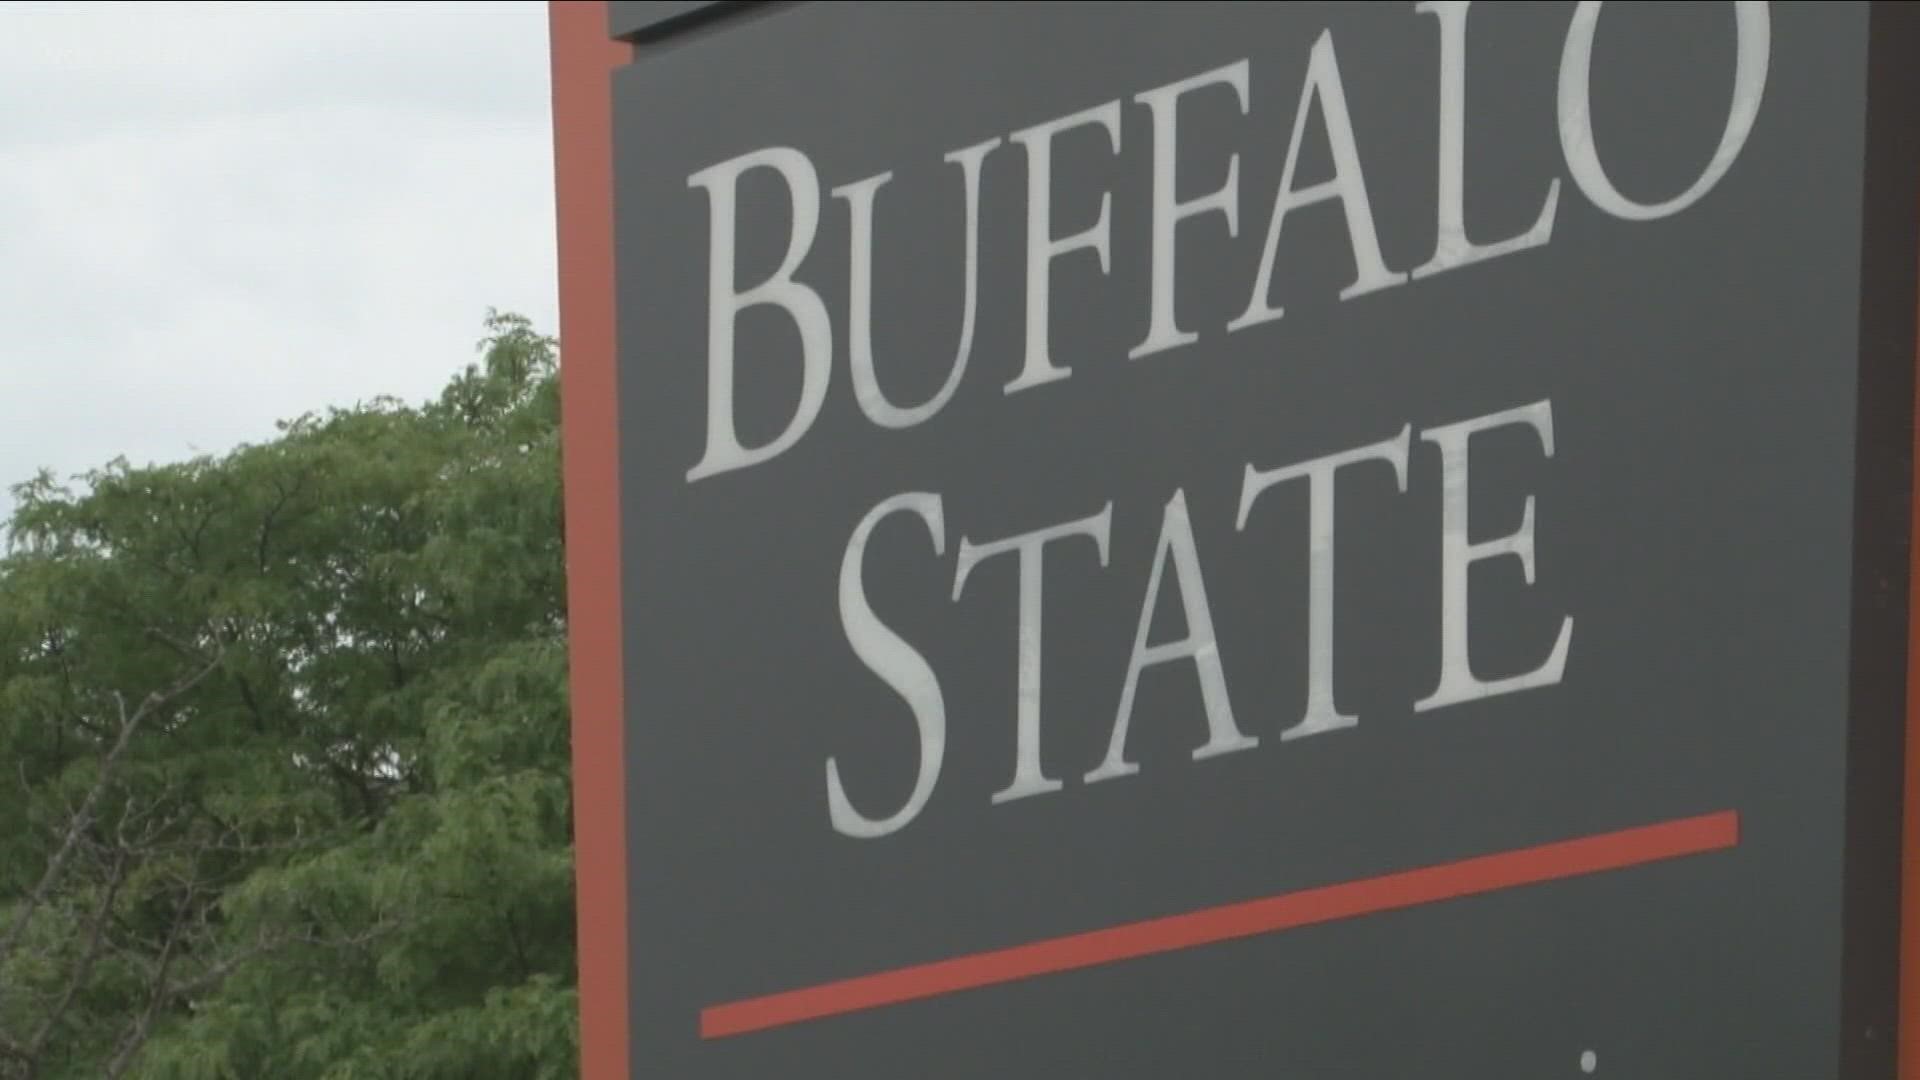 Buffalo State College will soon be the temporary home for some Afghan evacuees.